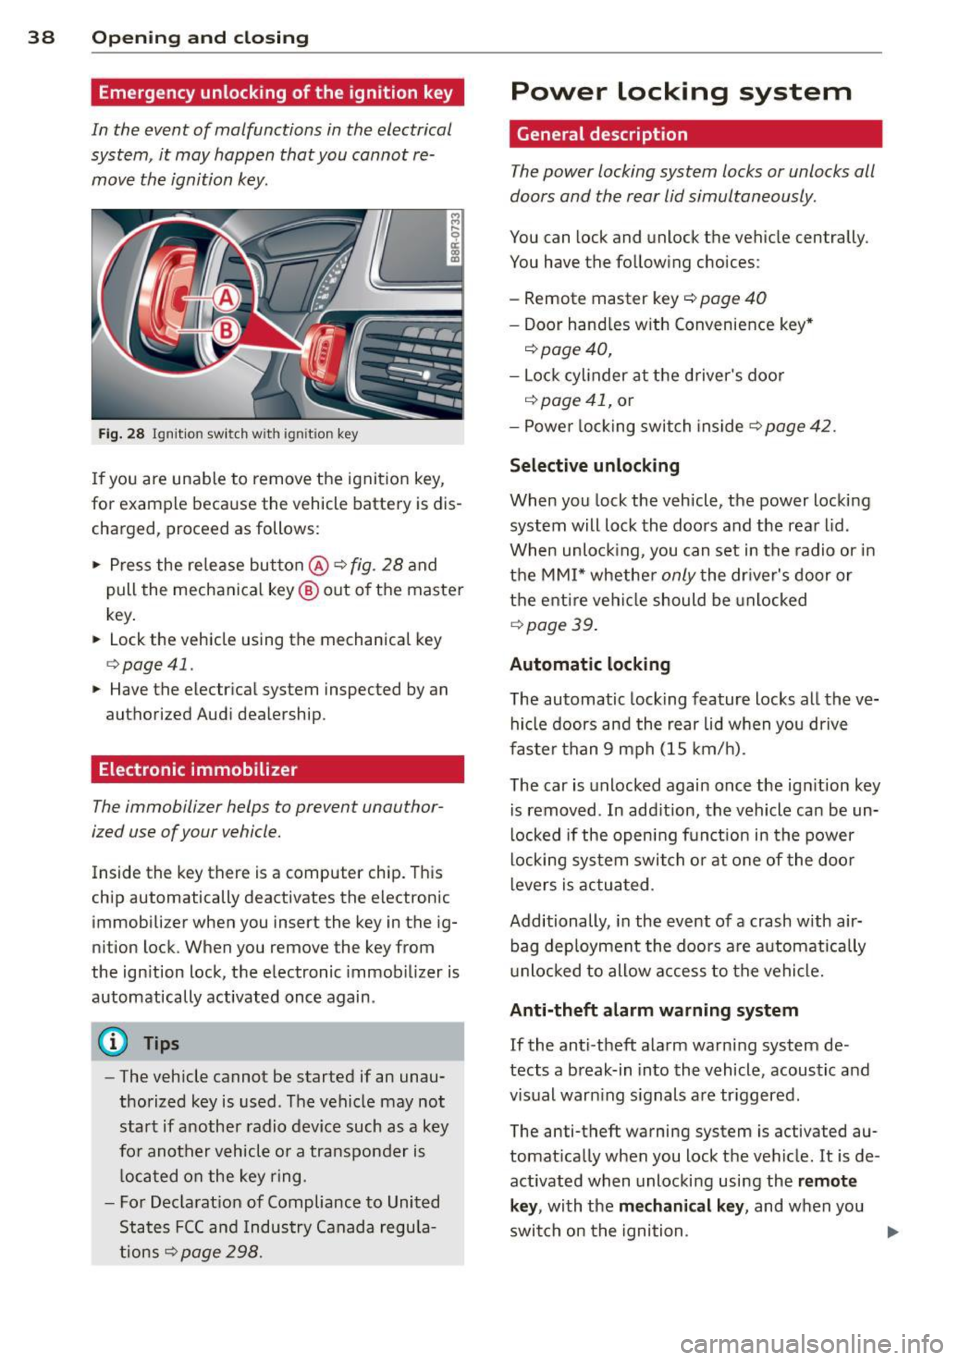 AUDI Q5 2013  Owners Manual 38  Openin g and  clo sing 
Emergency unlocking  of the  ignition  key 
In  the  event  of  malfunc tions in  the  electrical 
system,  it  may  happen  that  you  cannot  re­
move  the  ignition  ke